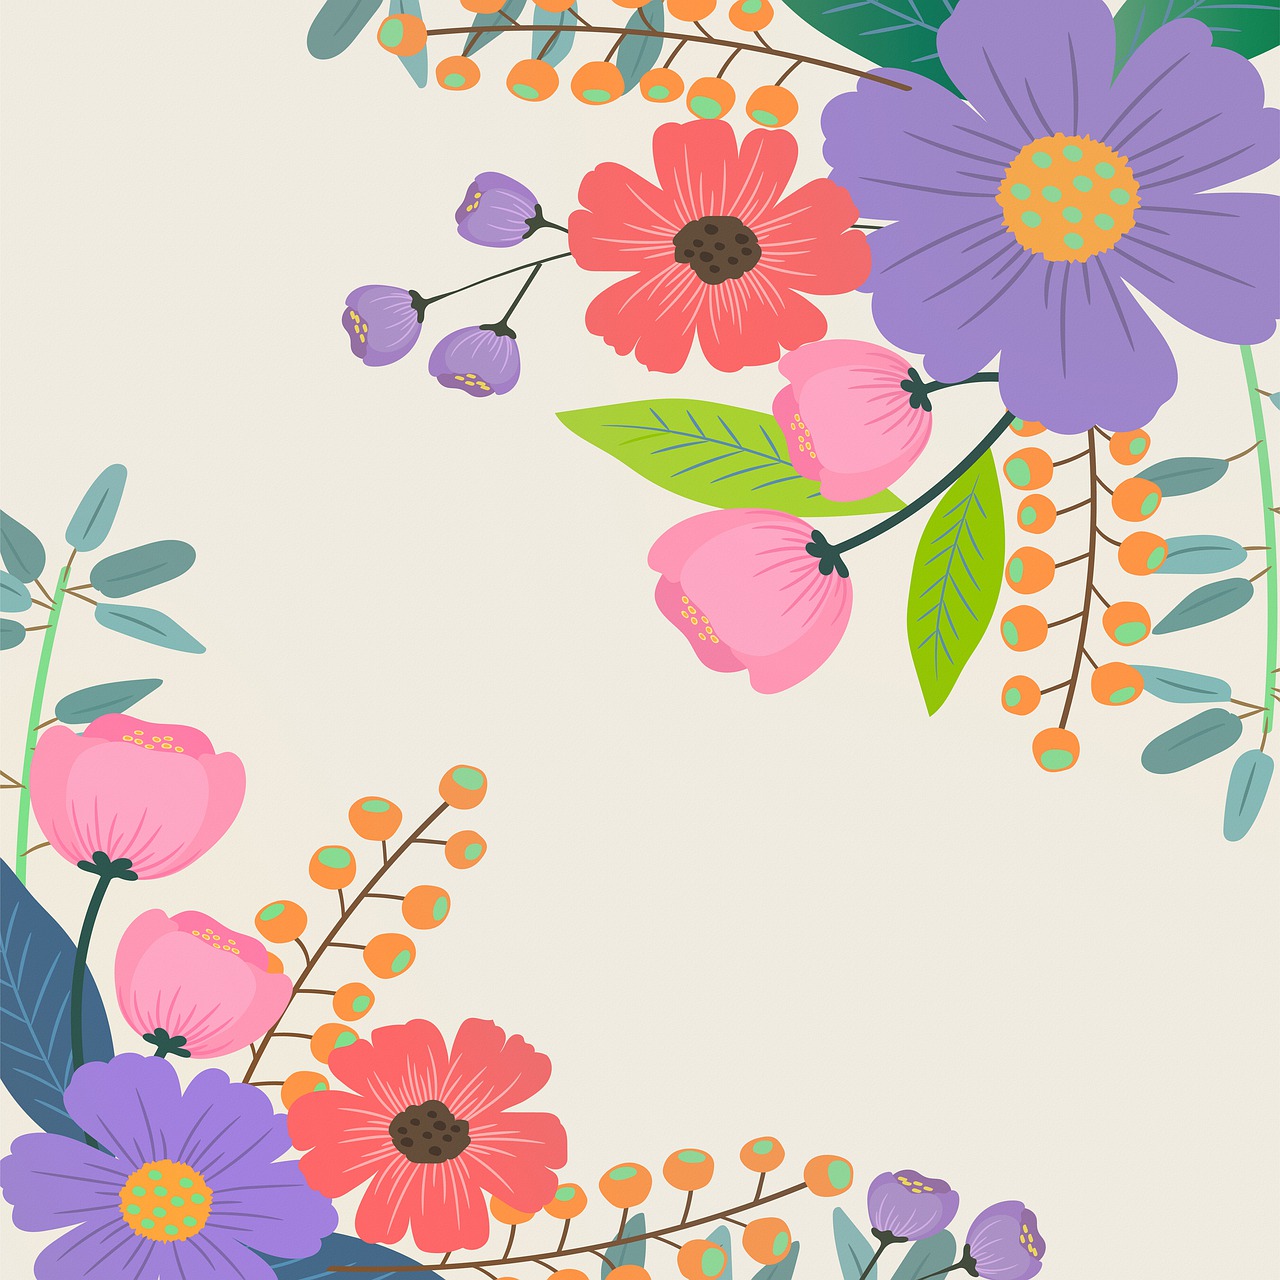 a picture of a bunch of flowers on a white background, a digital painting, by Fiona Rae, shutterstock contest winner, poster illustration, card template, shaded flat illustration, a beautiful artwork illustration